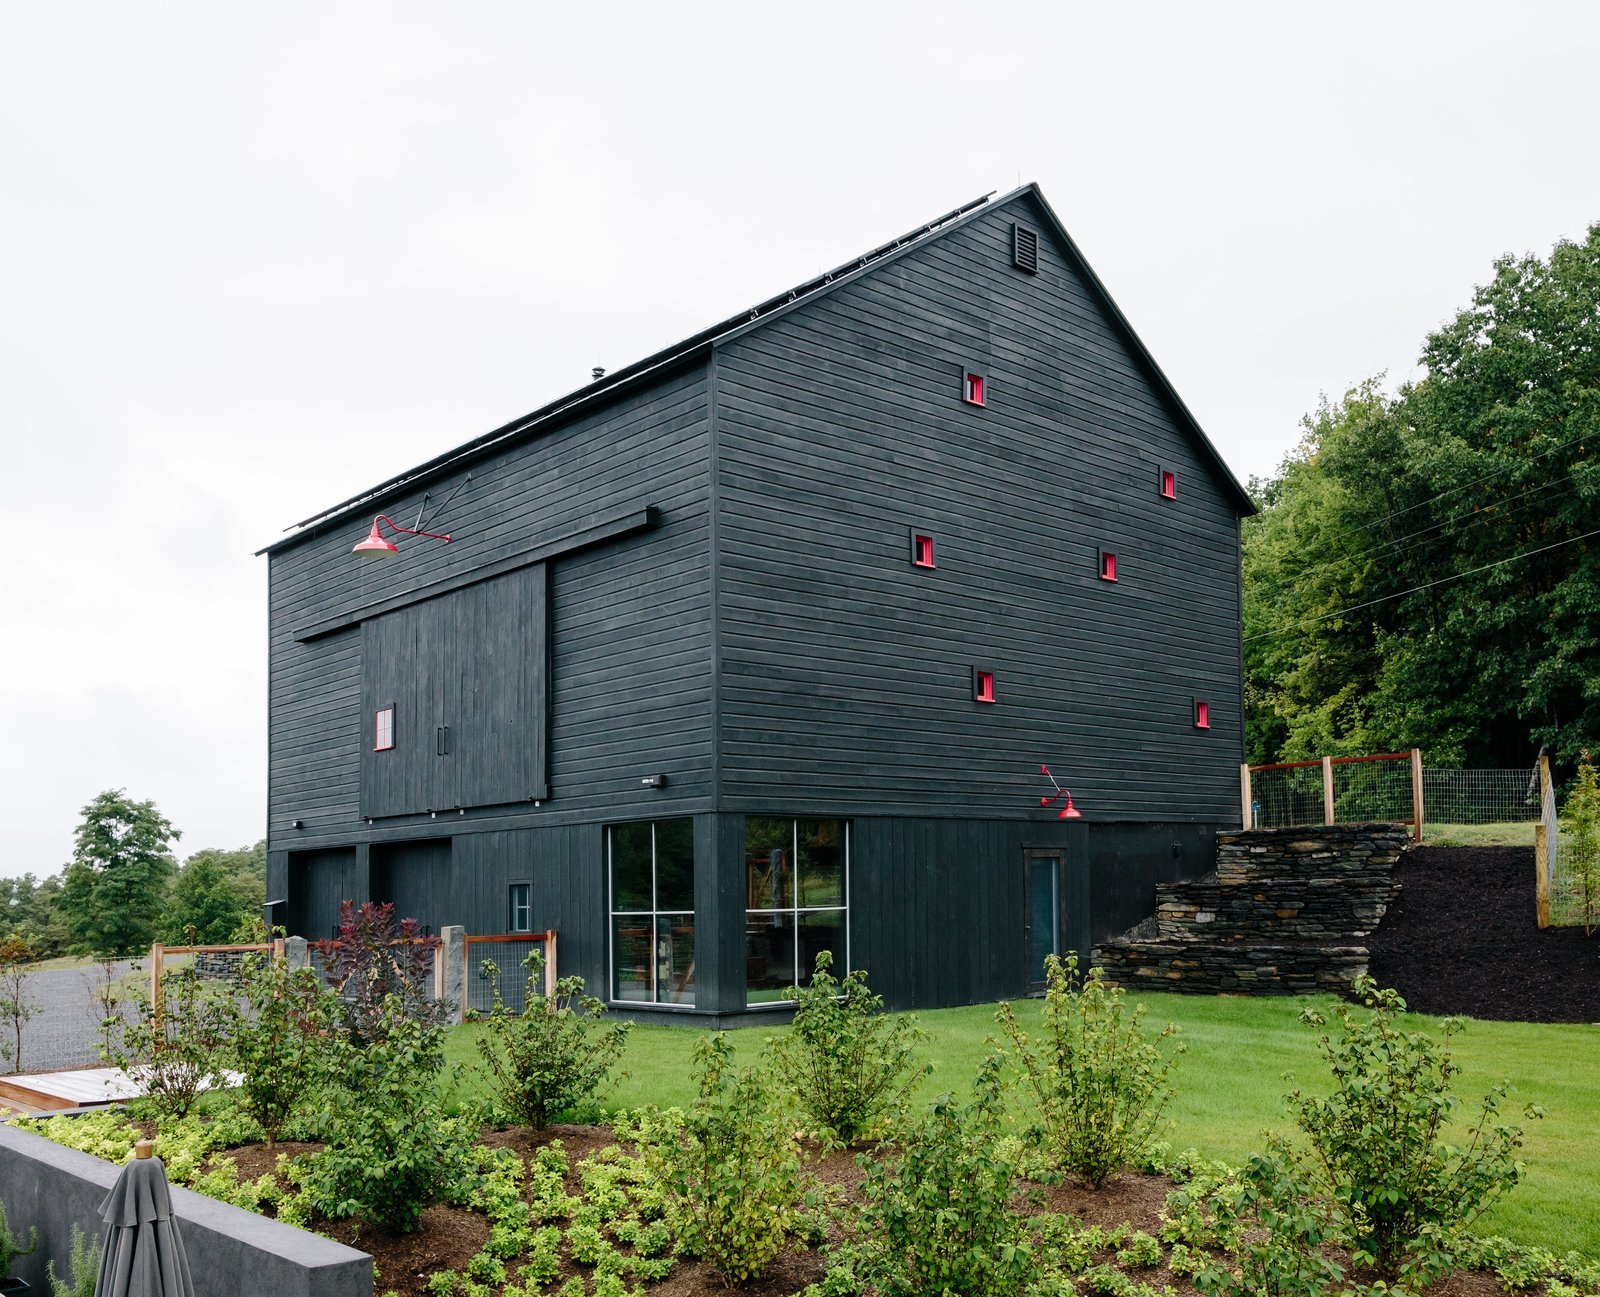 Black Gable Houses With Seriously Witchy Vibes